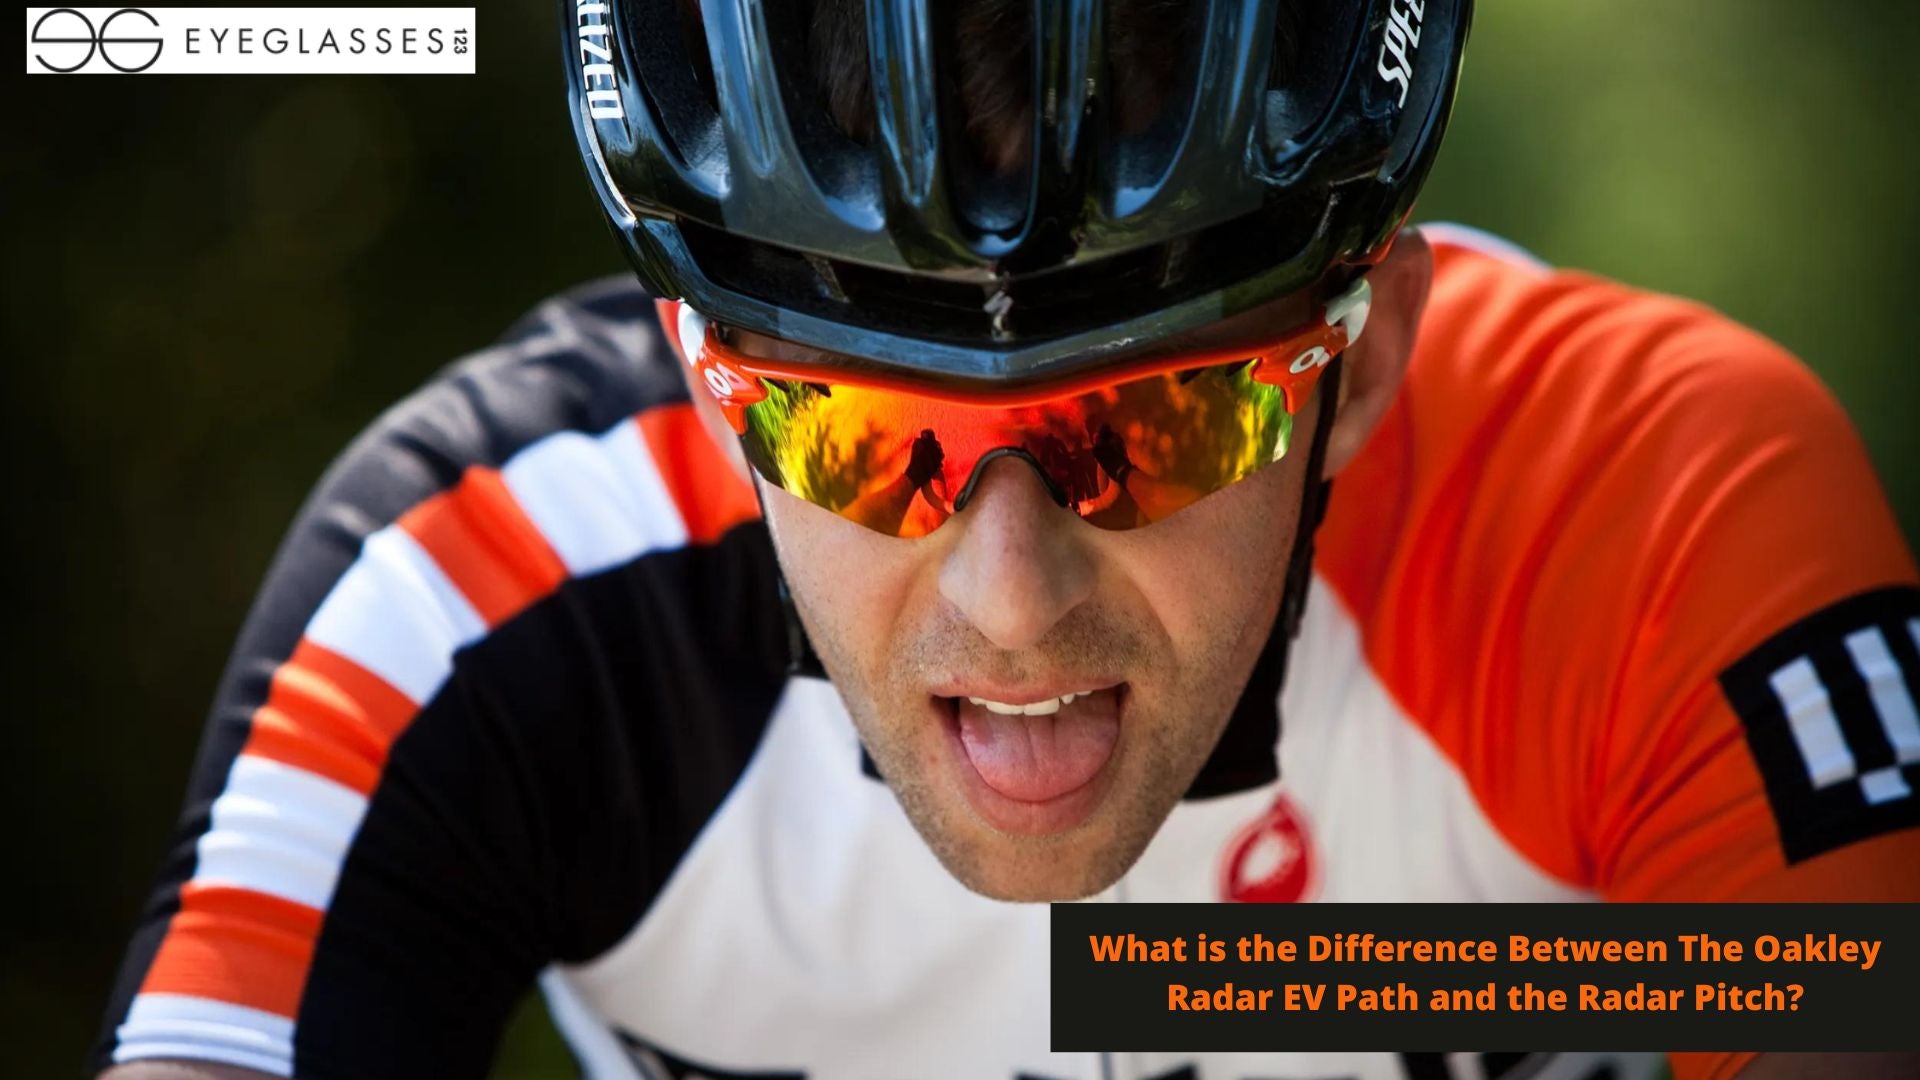 What is the Difference Between The Oakley Radar EV Path and the Radar Pitch?